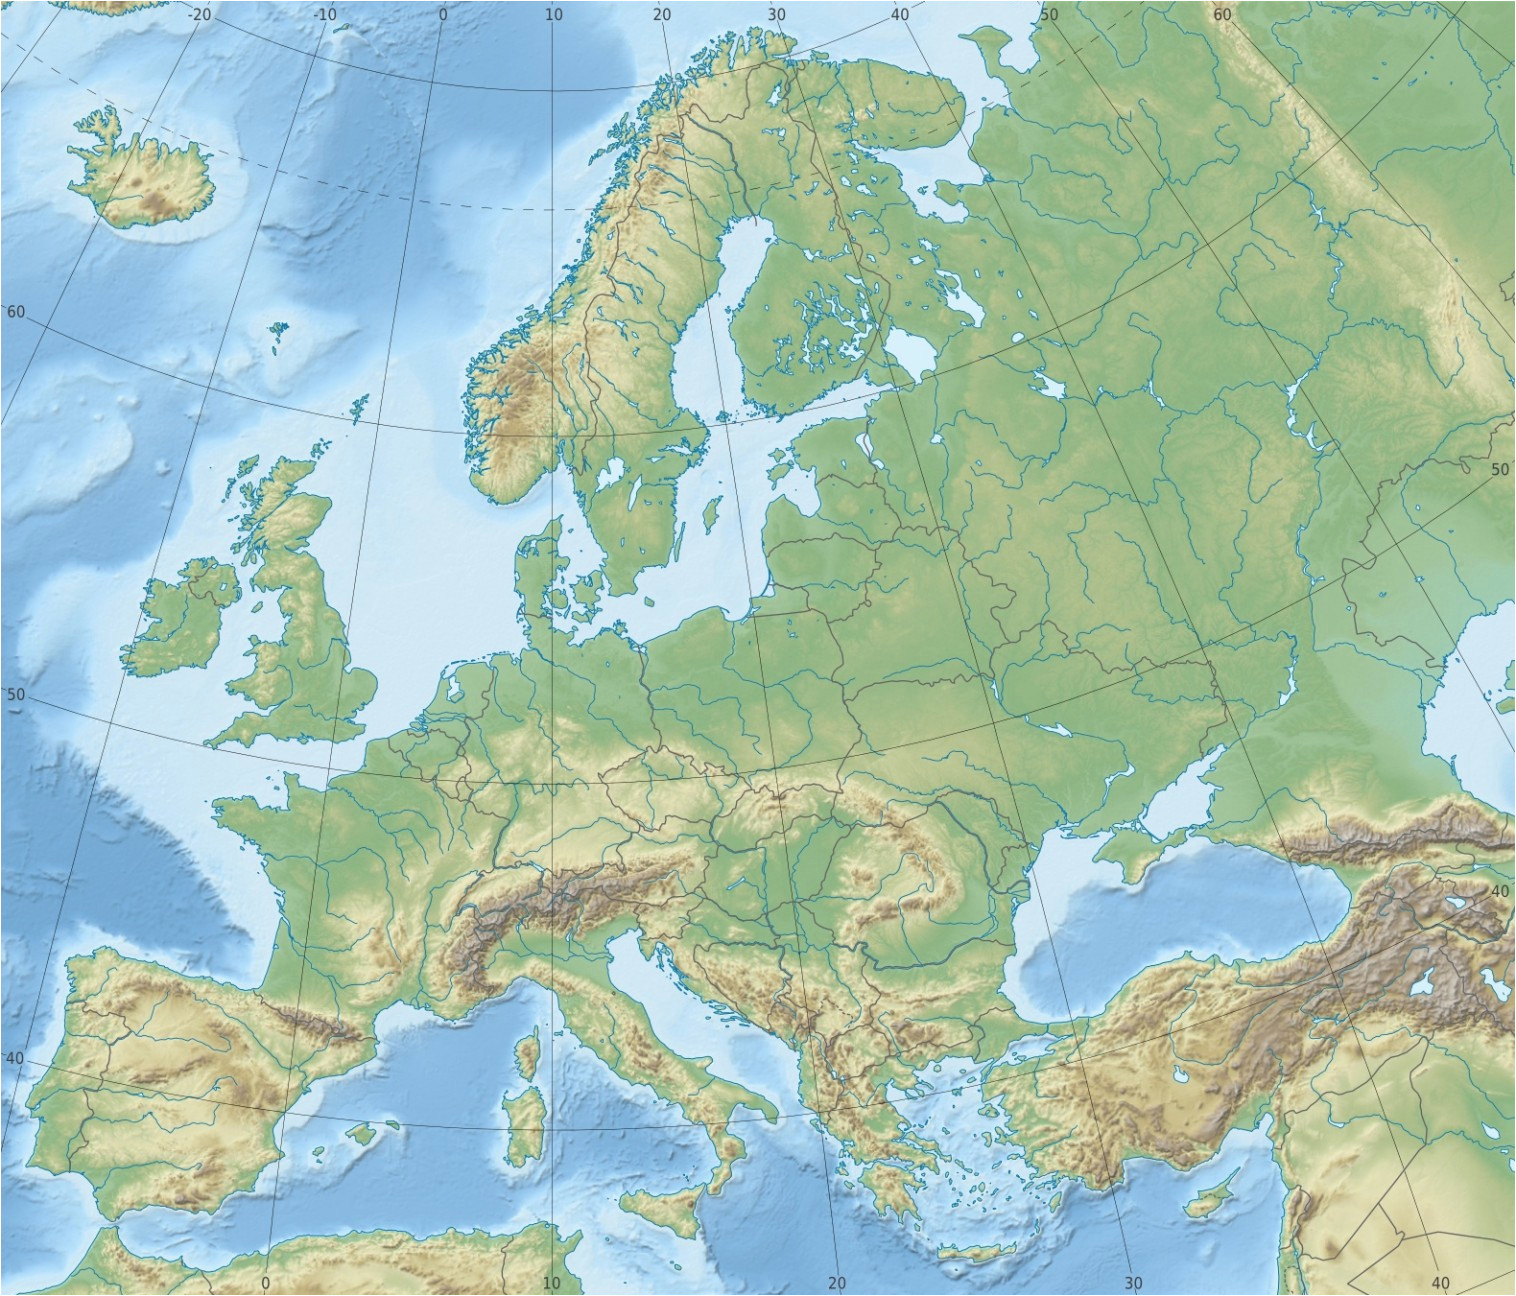 Topographical Map Of Europe Europe topographic Map Climatejourney org